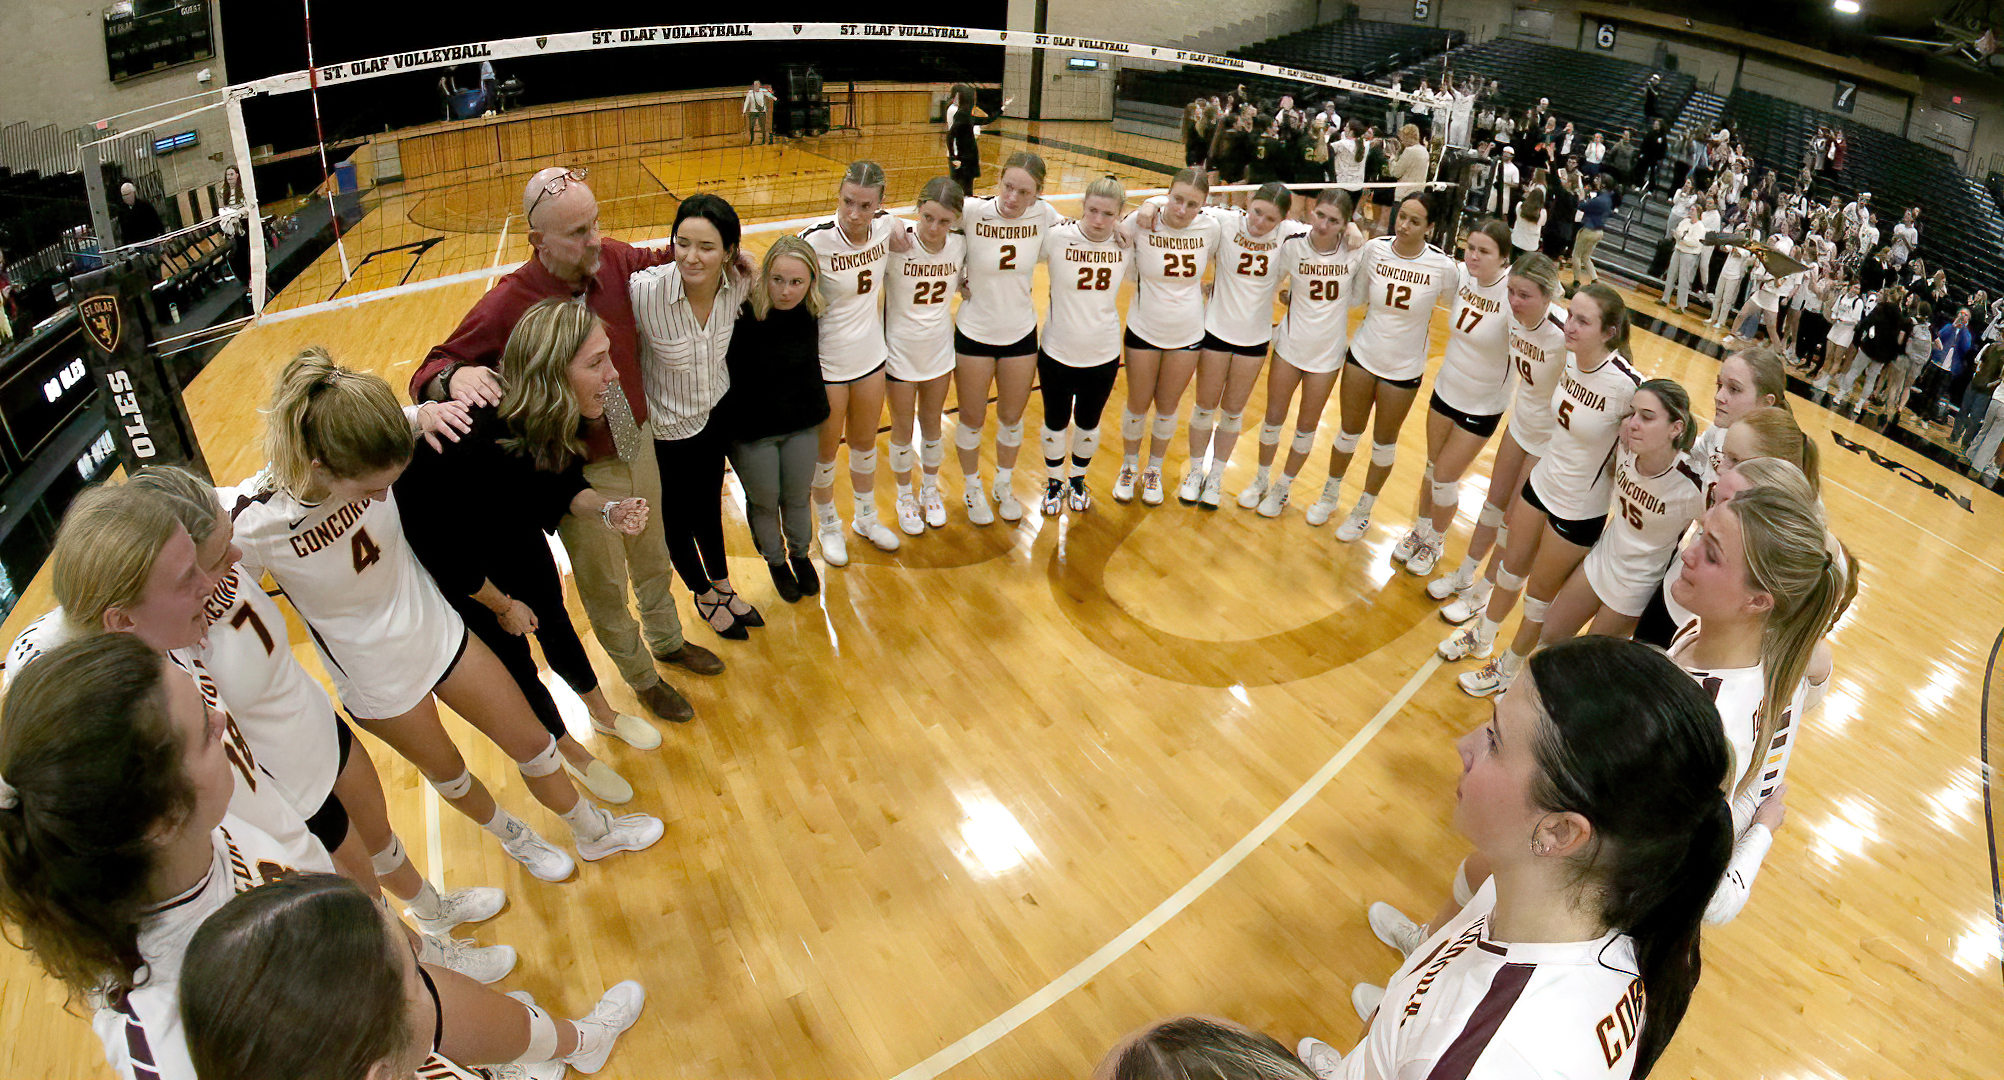 Concordia huddles up after their MIAC quarterfinal match at St. Olaf. (Photo courtesy of Ryan Coleman, D3phohotgraphy.com)